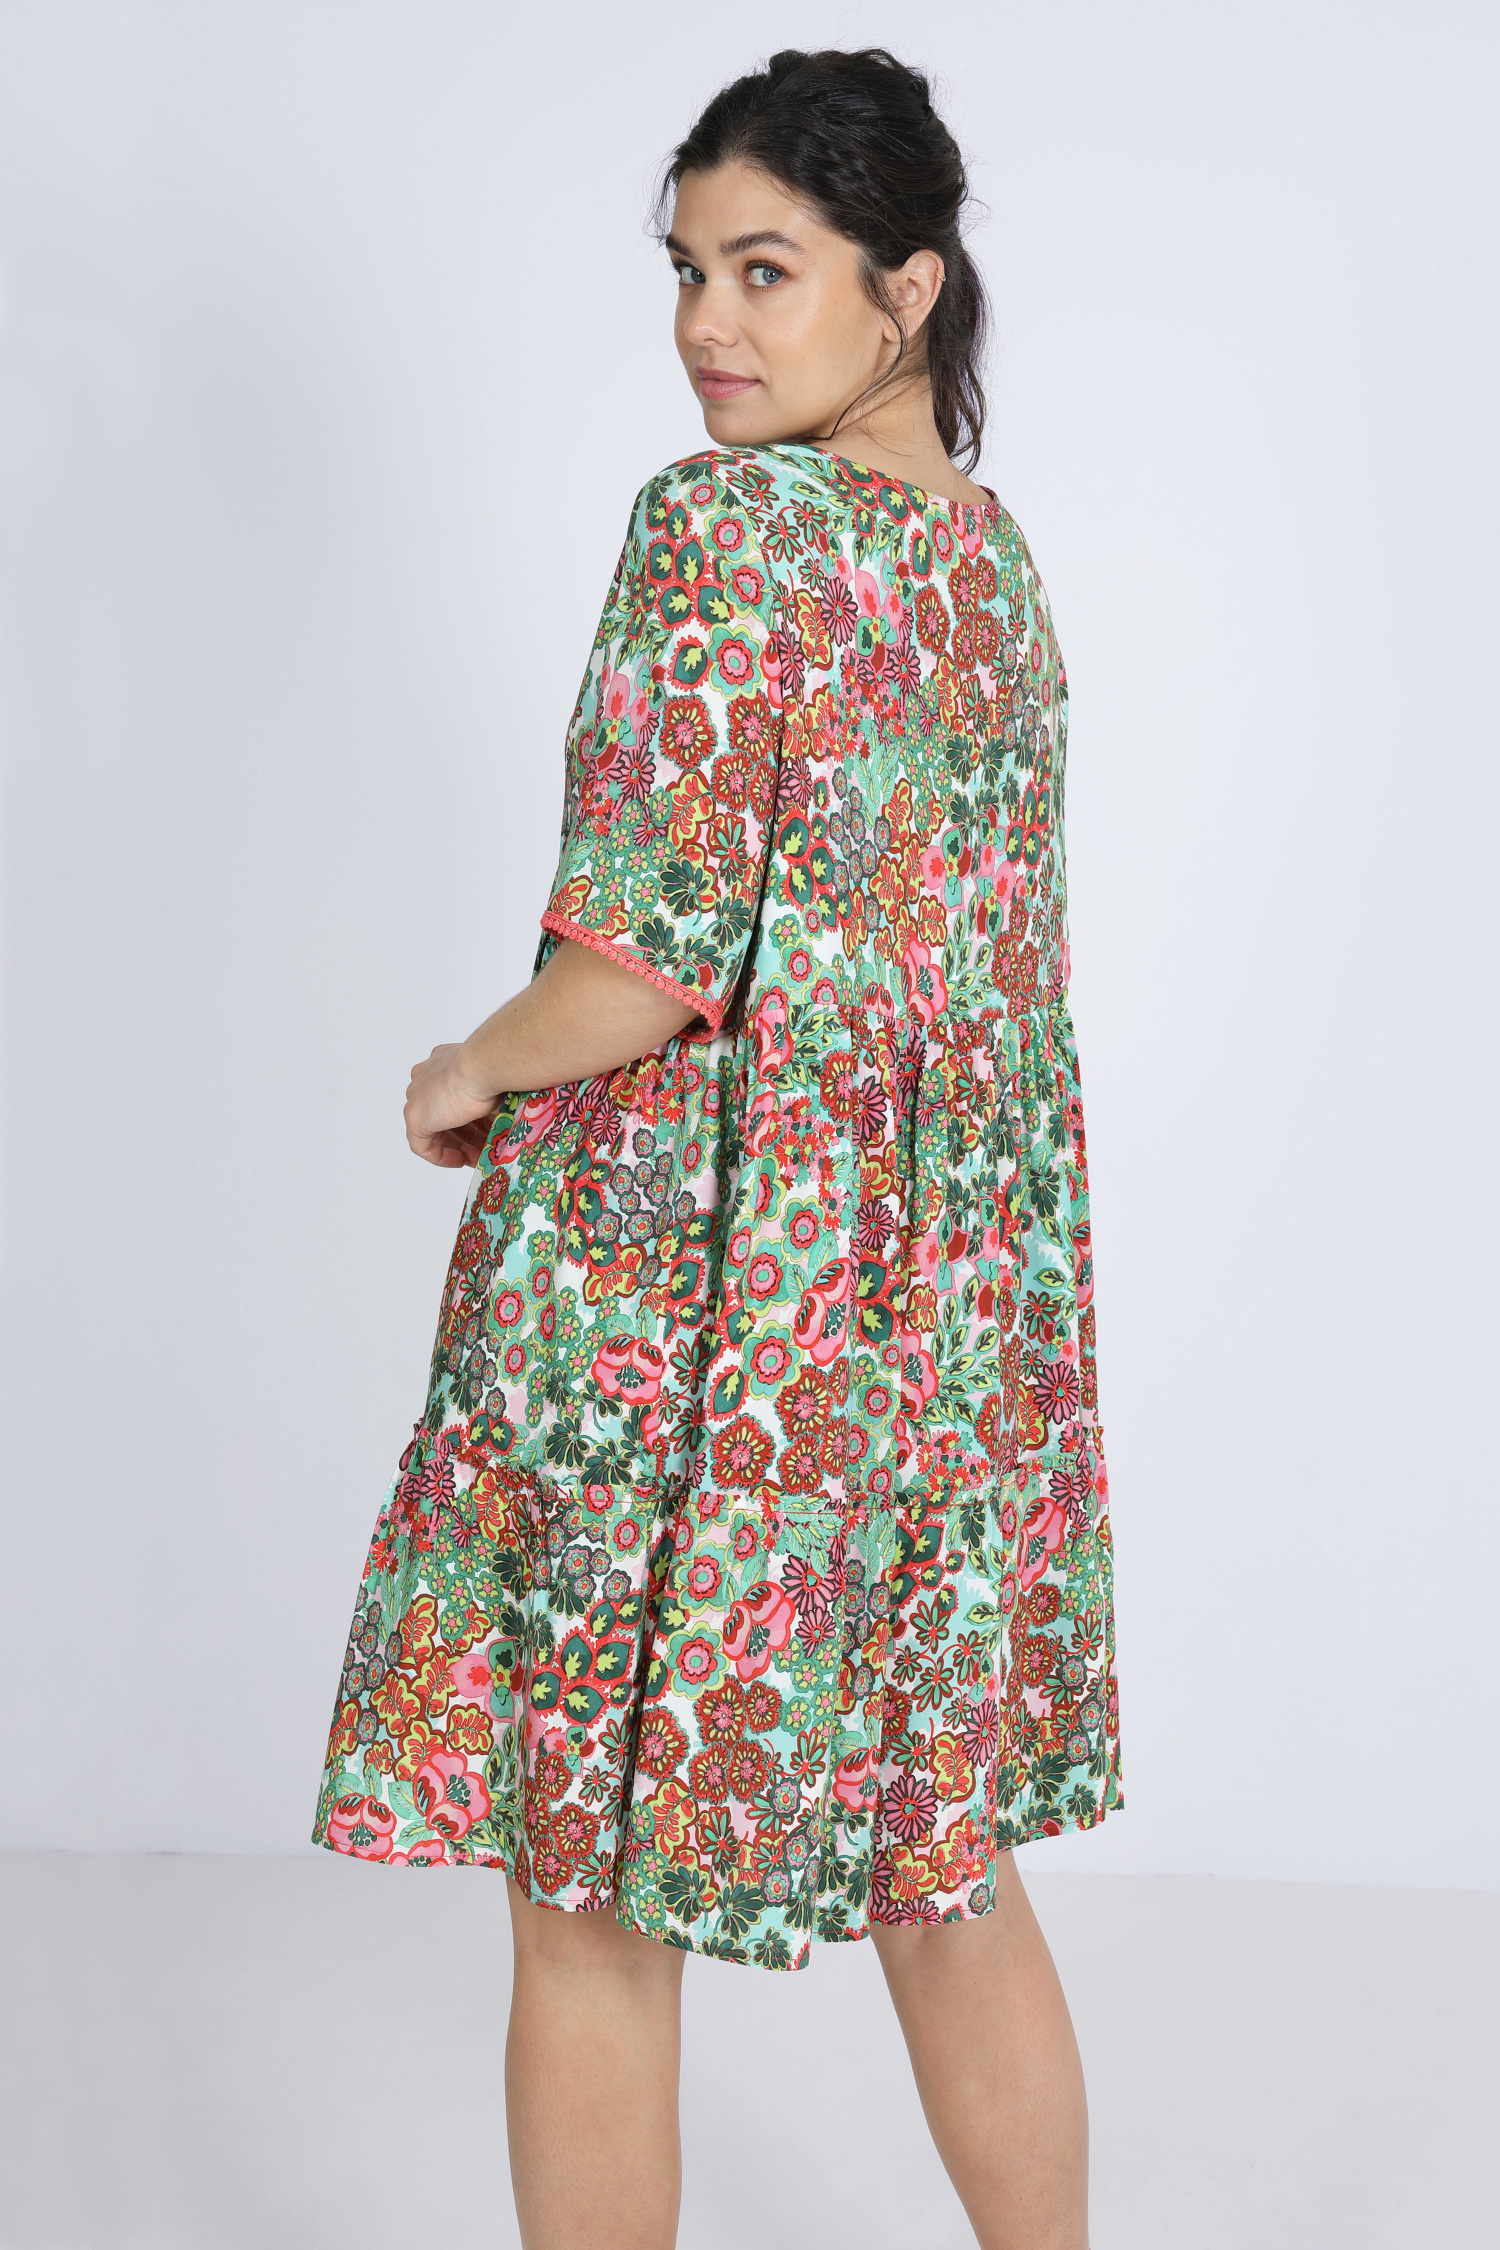 Bohemian style dress in floral print